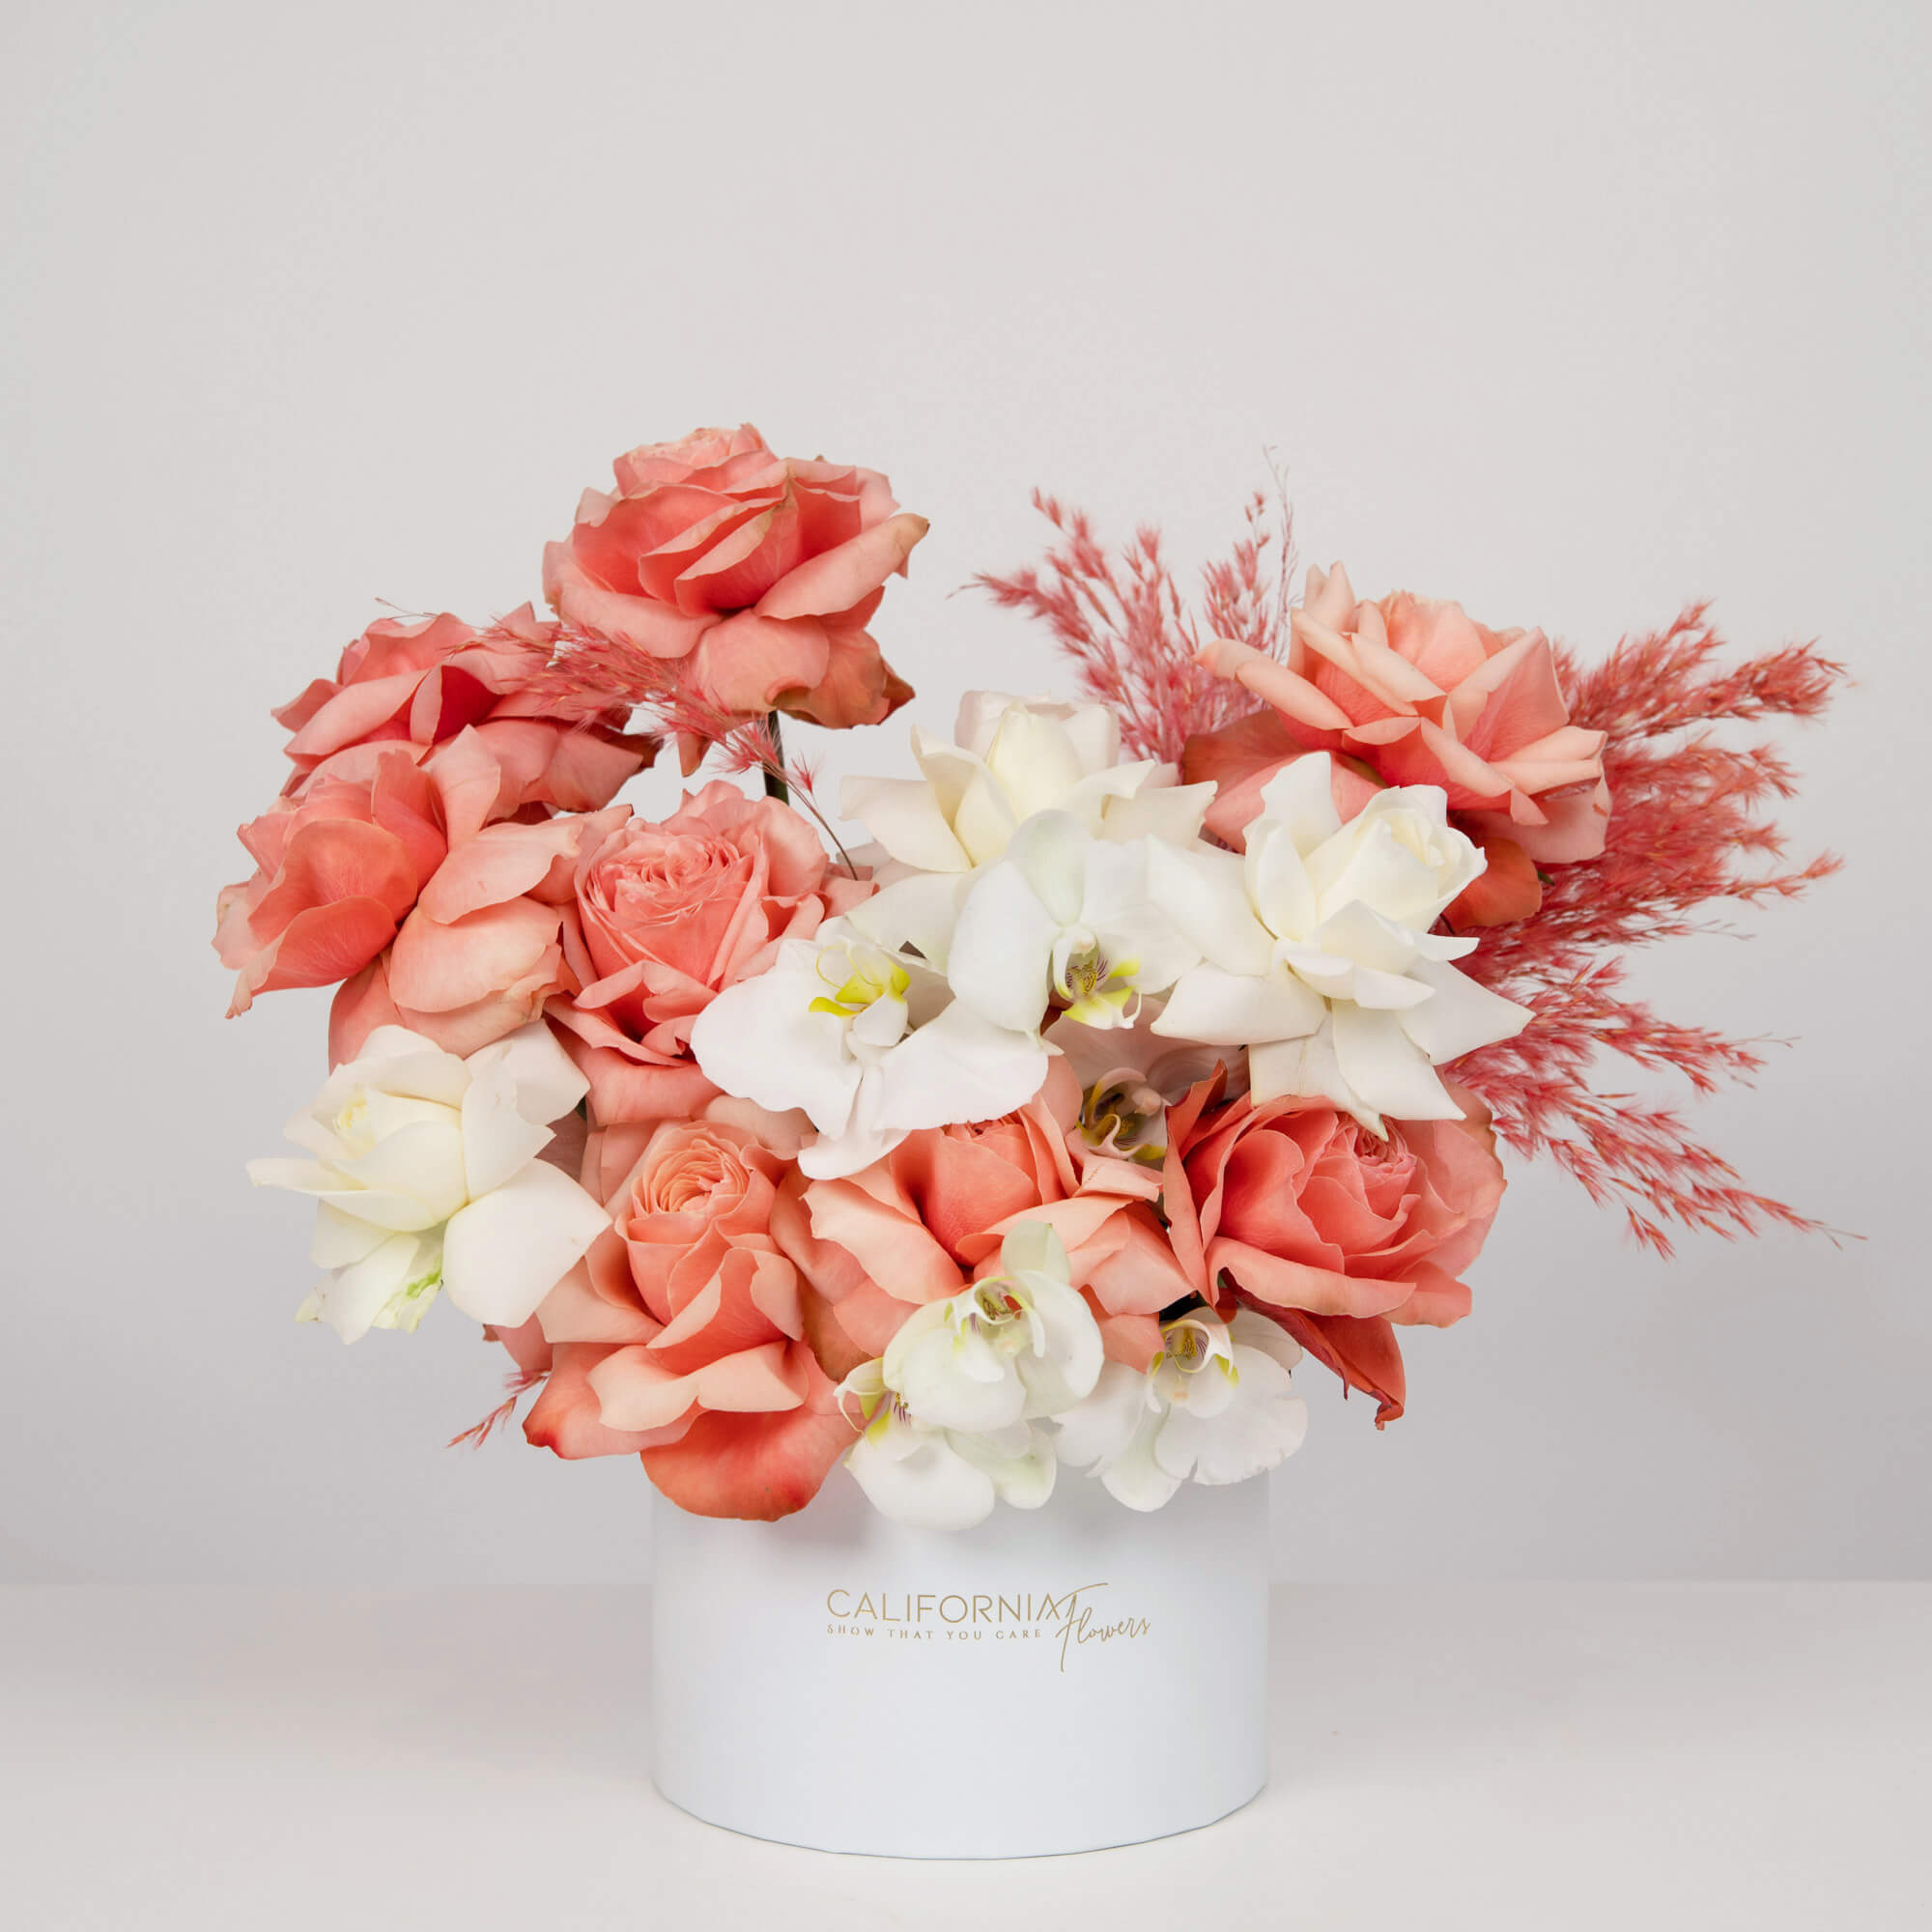 Floral arrangement with roses and phalaenopsis